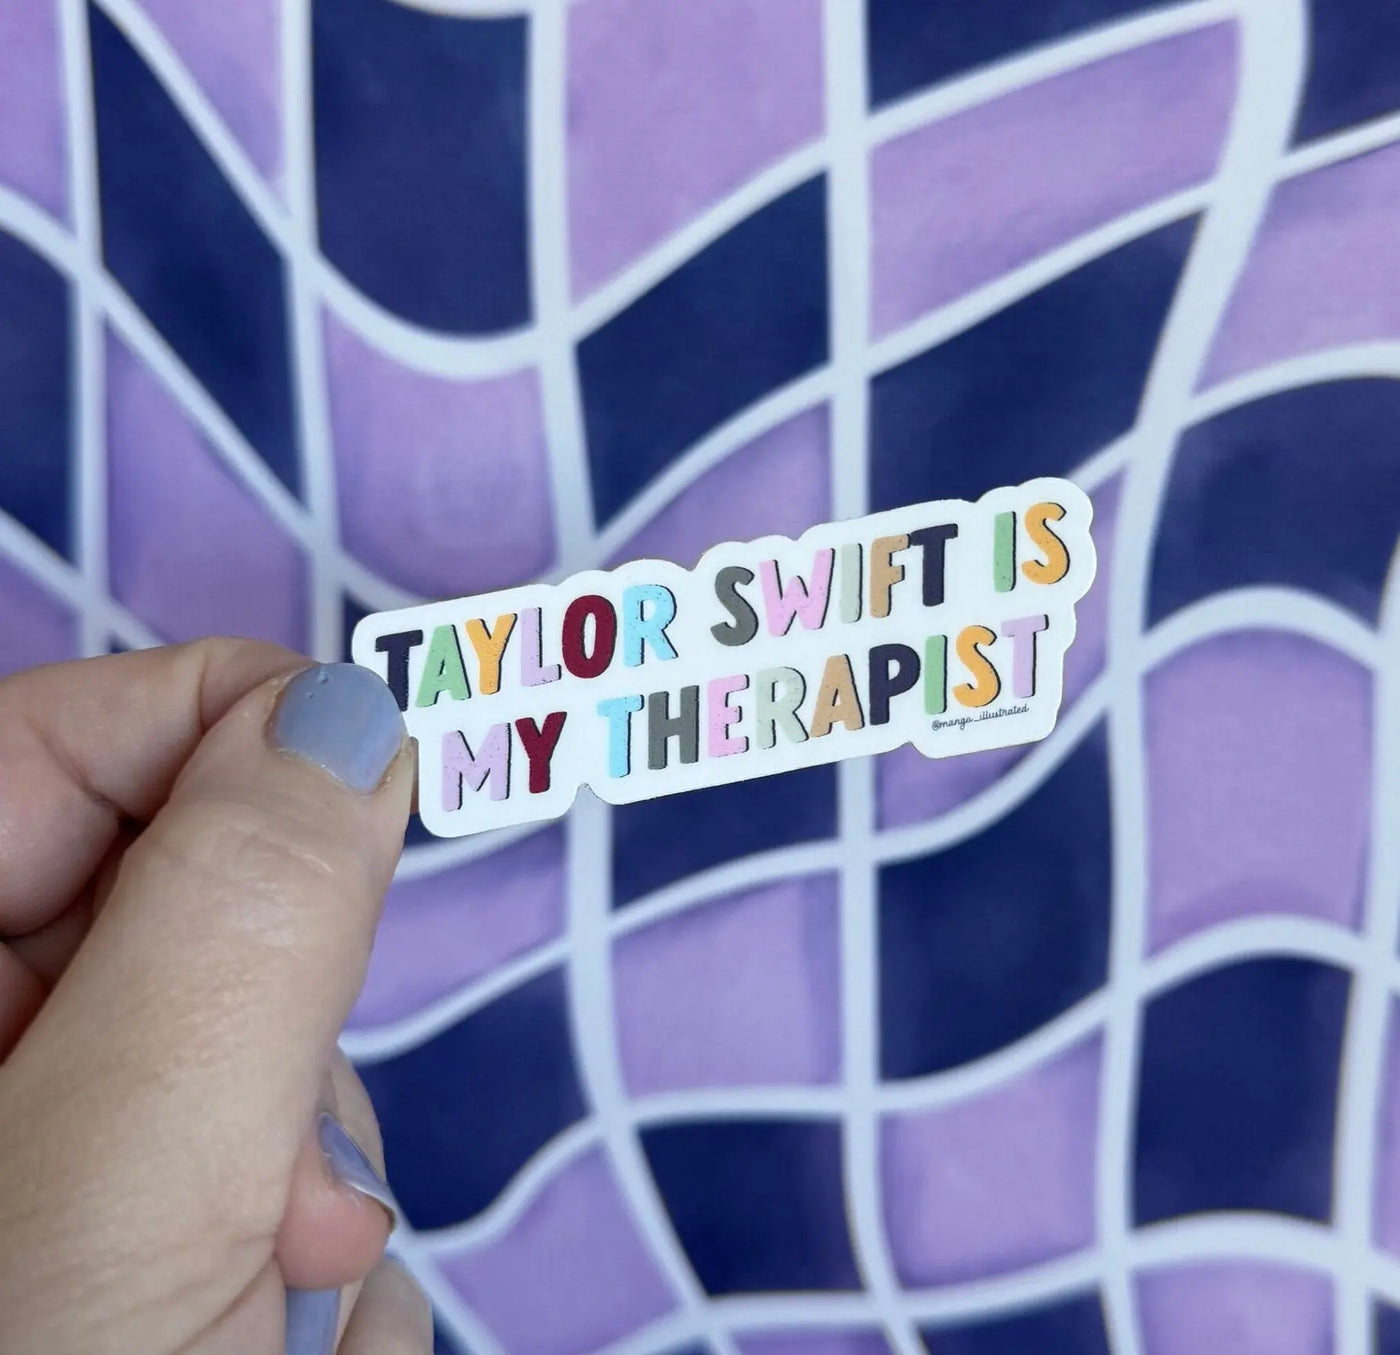 Taylor Swift is my therapist sticker MangoIllustrated